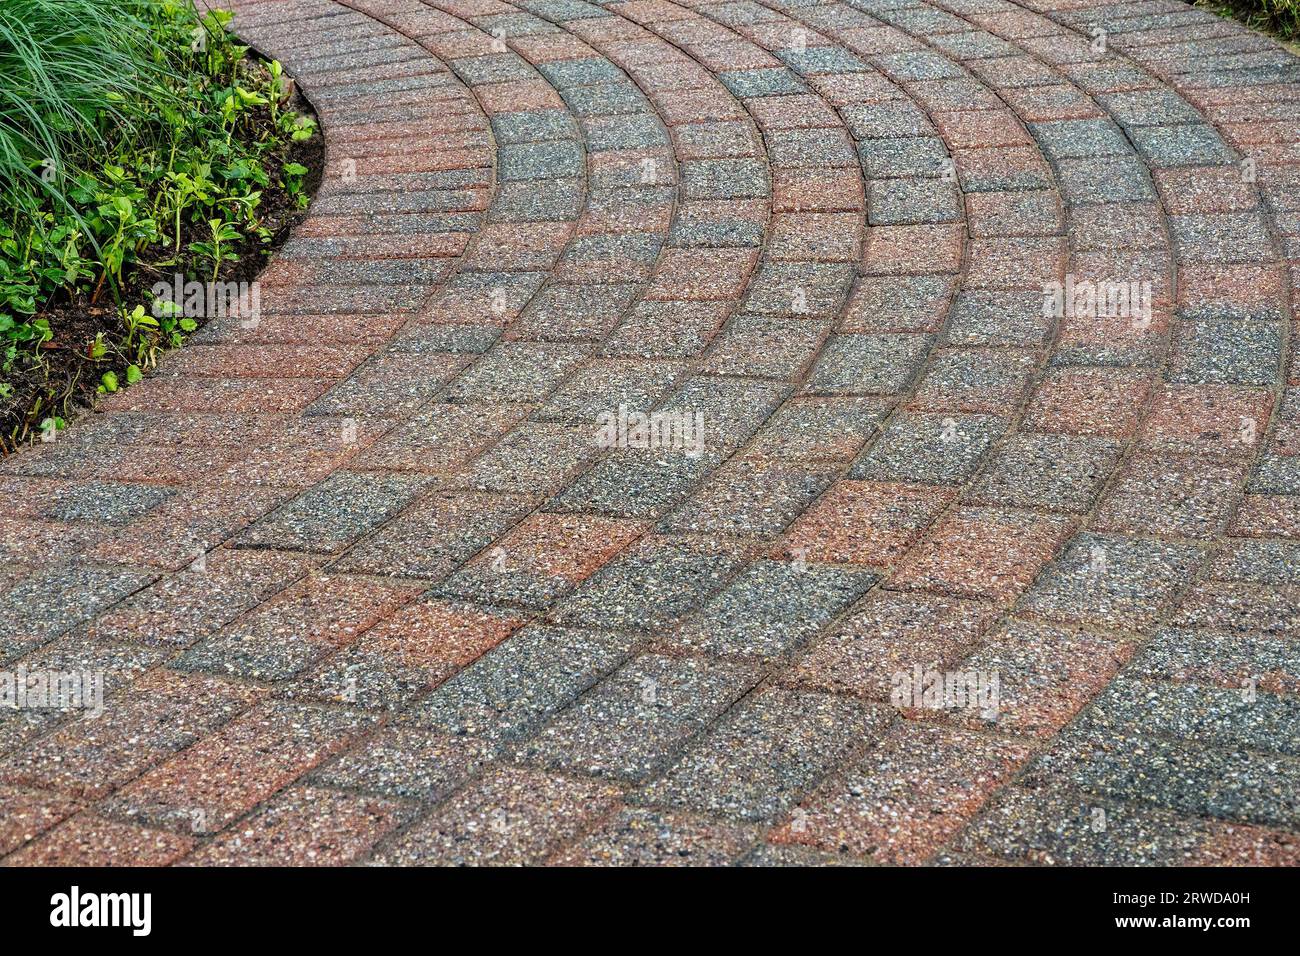 Brick pavers arranged in a curving pattern. Stock Photo